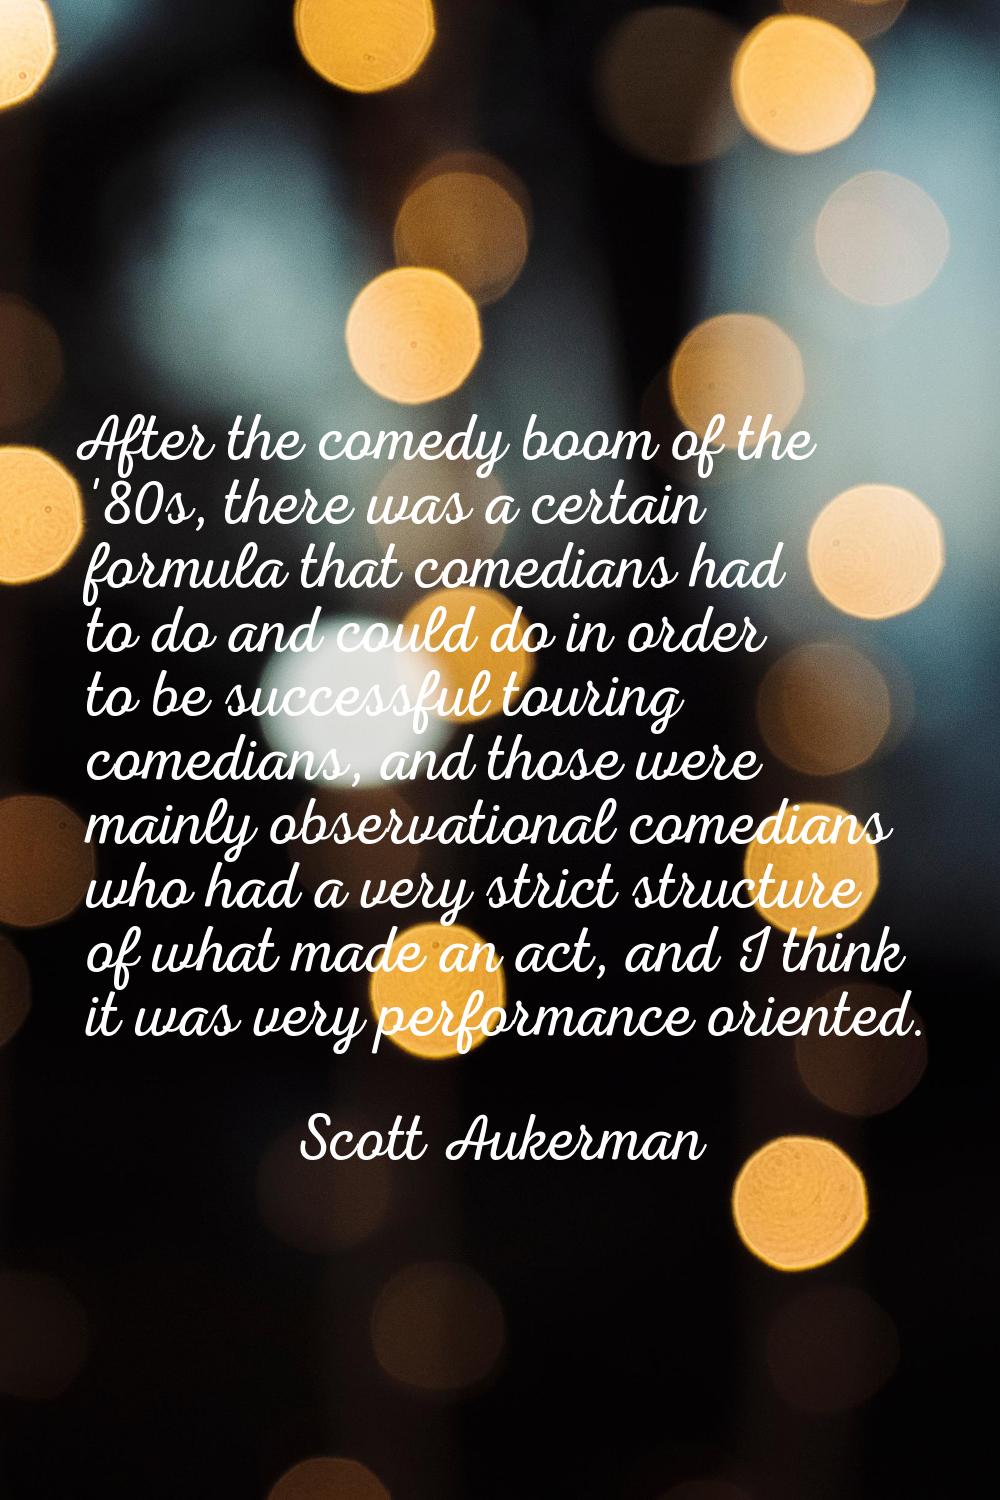 After the comedy boom of the '80s, there was a certain formula that comedians had to do and could d